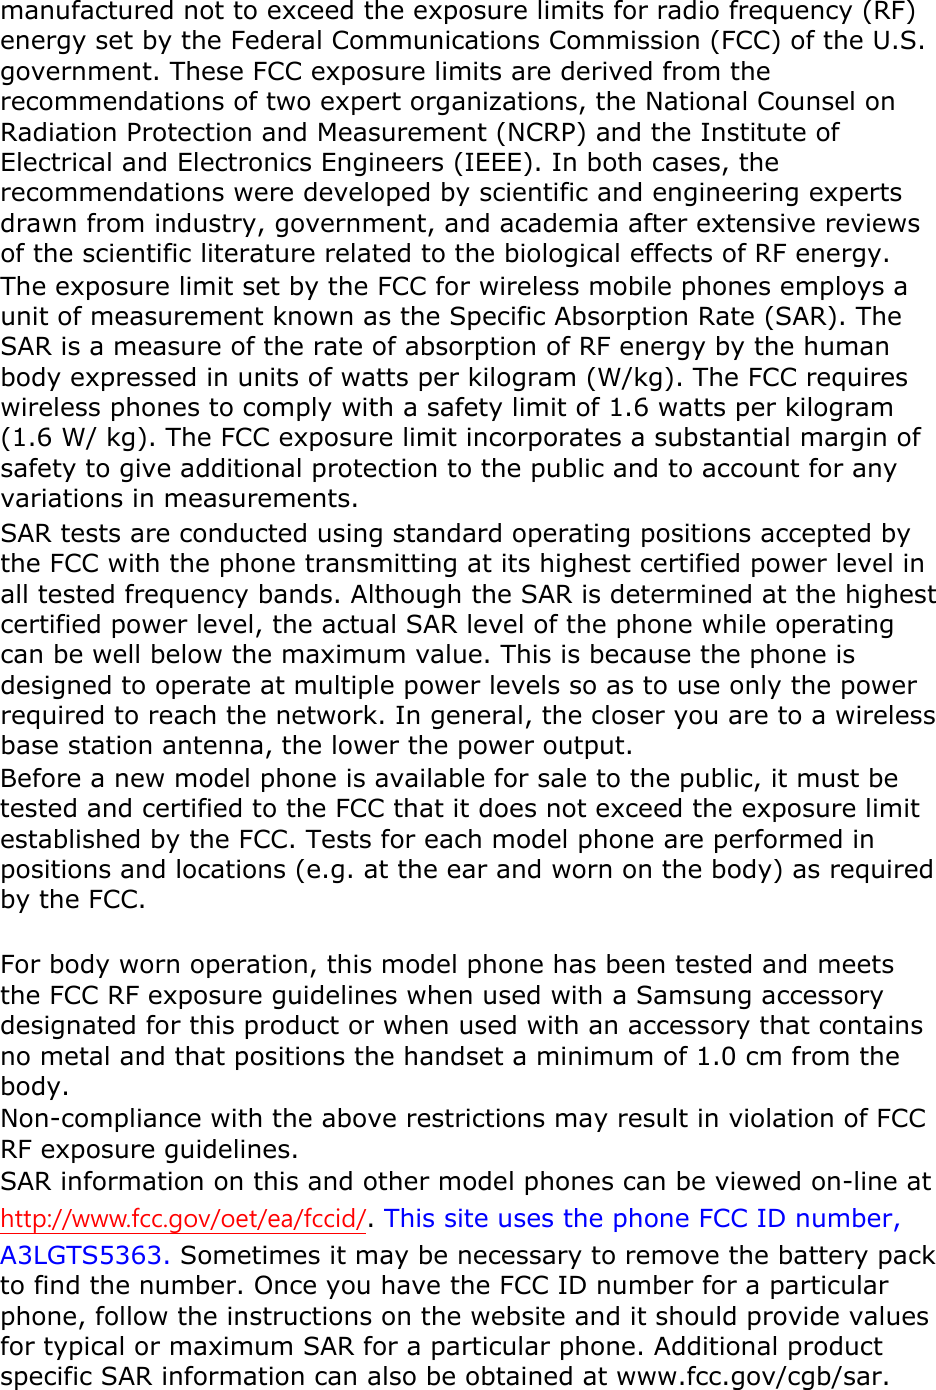 manufactured not to exceed the exposure limits for radio frequency (RF) energy set by the Federal Communications Commission (FCC) of the U.S. government. These FCC exposure limits are derived from the recommendations of two expert organizations, the National Counsel on Radiation Protection and Measurement (NCRP) and the Institute of Electrical and Electronics Engineers (IEEE). In both cases, the recommendations were developed by scientific and engineering experts drawn from industry, government, and academia after extensive reviews of the scientific literature related to the biological effects of RF energy.The exposure limit set by the FCC for wireless mobile phones employs a unit of measurement known as the Specific Absorption Rate (SAR). The SAR is a measure of the rate of absorption of RF energy by the human body expressed in units of watts per kilogram (W/kg). The FCC requires wireless phones to comply with a safety limit of 1.6 watts per kilogram (1.6 W/ kg). The FCC exposure limit incorporates a substantial margin of safety to give additional protection to the public and to account for any variations in measurements.SAR tests are conducted using standard operating positions accepted by the FCC with the phone transmitting at its highest certified power level in all tested frequency bands. Although the SAR is determined at the highest certified power level, the actual SAR level of the phone while operating can be well below the maximum value. This is because the phone is designed to operate at multiple power levels so as to use only the power required to reach the network. In general, the closer you are to a wireless base station antenna, the lower the power output. Before a new model phone is available for sale to the public, it must be tested and certified to the FCC that it does not exceed the exposure limit established by the FCC. Tests for each model phone are performed in positions and locations (e.g. at the ear and worn on the body) as required by the FCC.     For body worn operation, this model phone has been tested and meets the FCC RF exposure guidelines when used with a Samsung accessory designated for this product or when used with an accessory that contains no metal and that positions the handset a minimum of 1.0 cm from the body.Non-compliance with the above restrictions may result in violation of FCC RF exposure guidelines. SAR information on this and other model phones can be viewed on-line at http://www.fcc.gov/oet/ea/fccid/.This site uses the phone FCC ID number, A3LGTS5363. Sometimes it may be necessary to remove the battery pack to find the number. Once you have the FCC ID number for a particular phone, follow the instructions on the website and it should provide values for typical or maximum SAR for a particular phone. Additional product specific SAR information can also be obtained at www.fcc.gov/cgb/sar. 